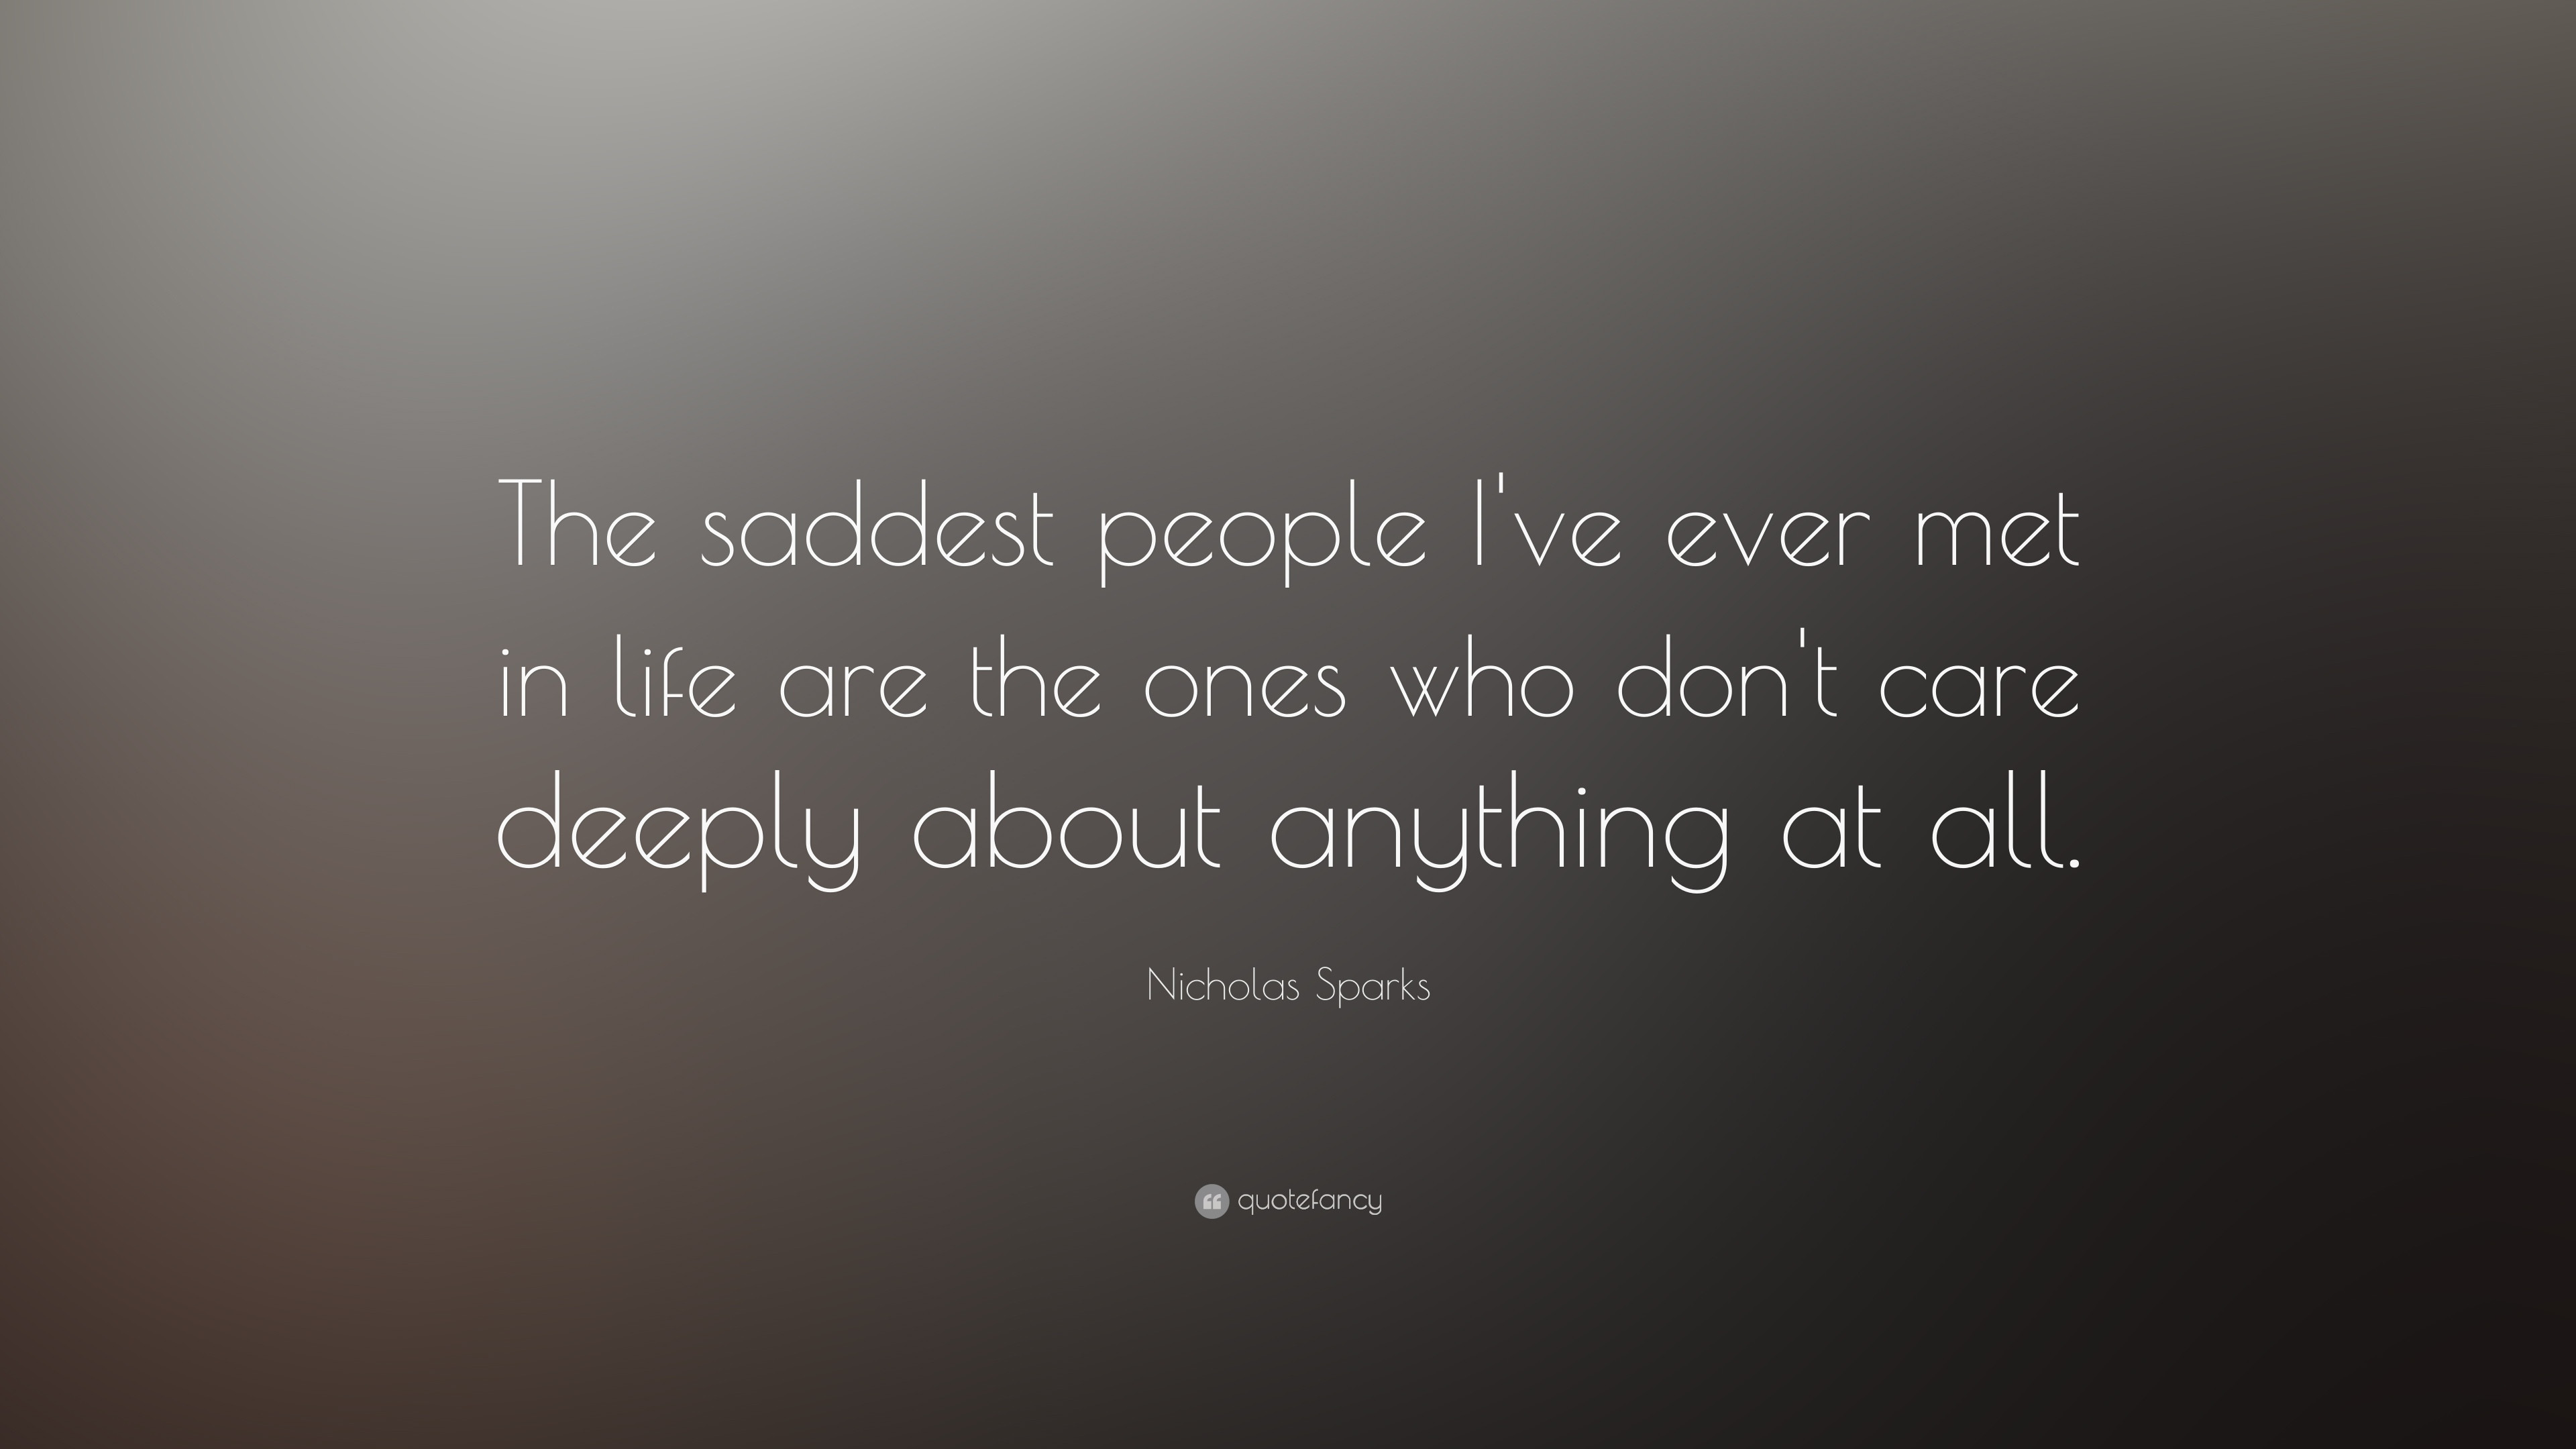 Saddest Quote Ever
 Nicholas Sparks Quote “The saddest people I ve ever met